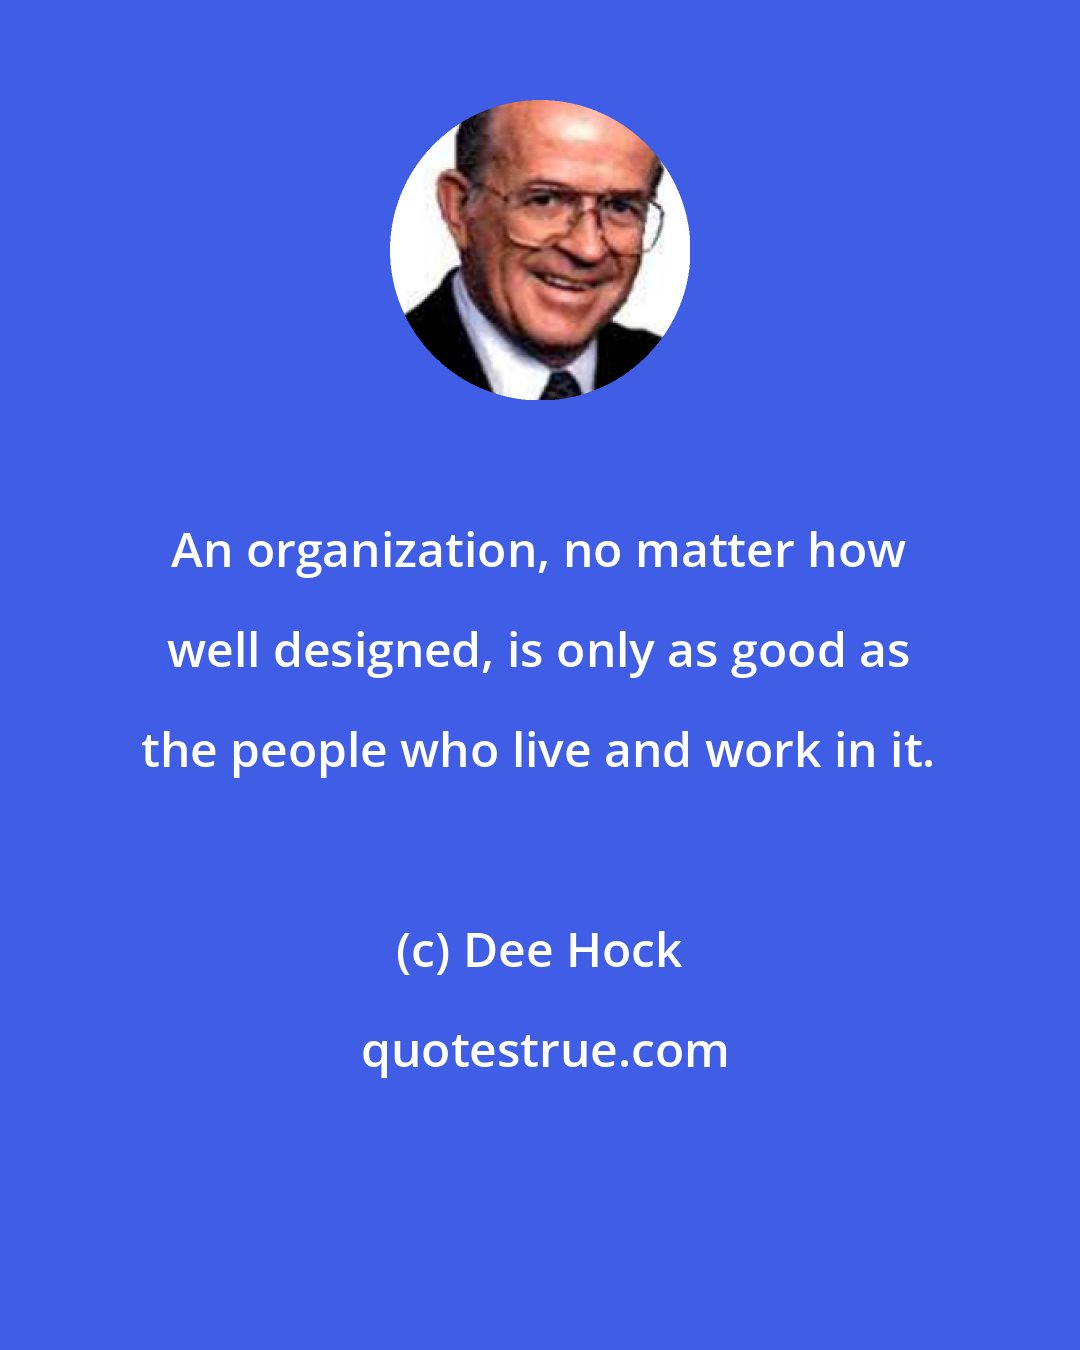 Dee Hock: An organization, no matter how well designed, is only as good as the people who live and work in it.